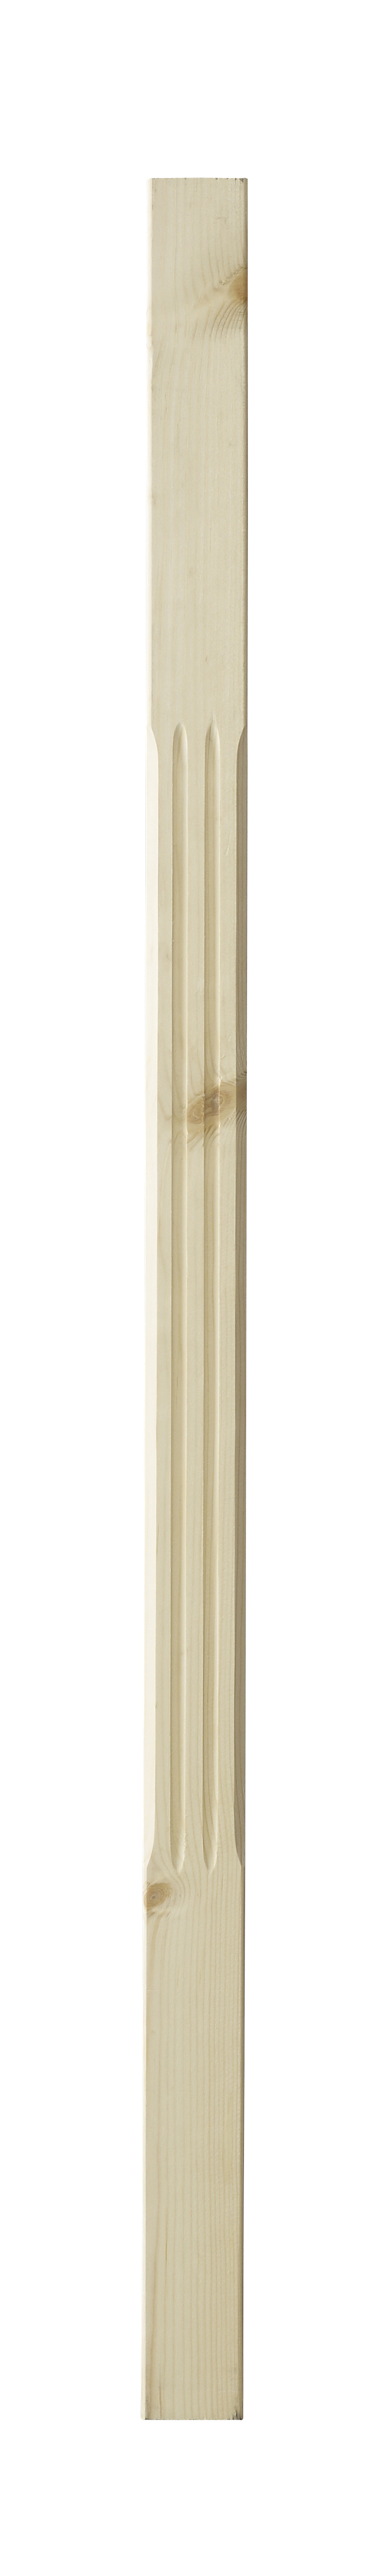 1 Pine Stop Chamfer Fluted Baluster 900 41